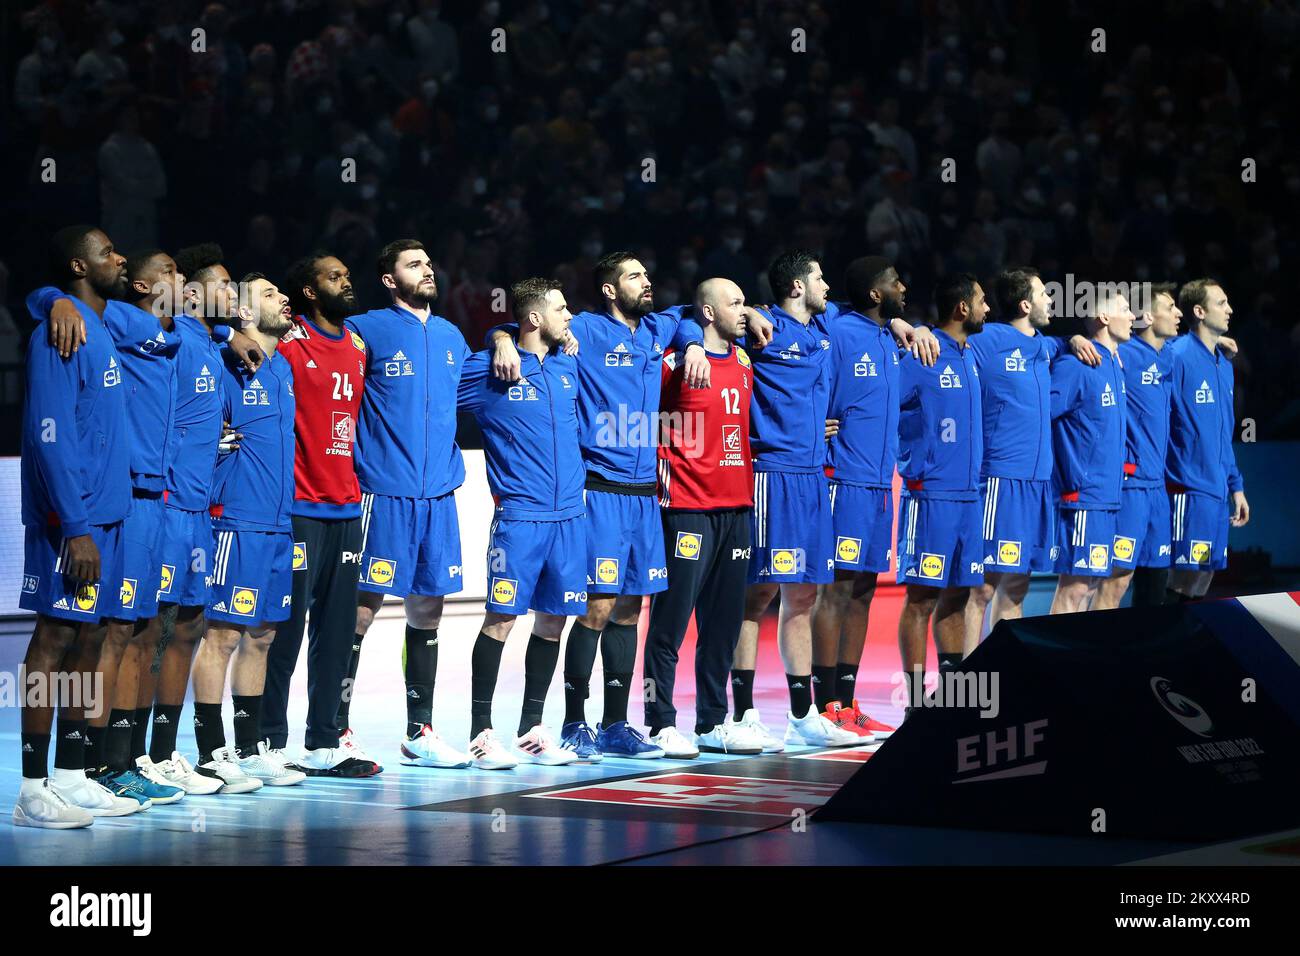 SZEGED, HUNGARY - JANUARY 13: Team of France during the national anthem during the Men's EHF EURO 2022 match between Croatia and France at Szeged Uj Arena on January 13, 2022 in Szeged, Hungary. Photo: Sanjin Strukic/PIXSELL Stock Photo